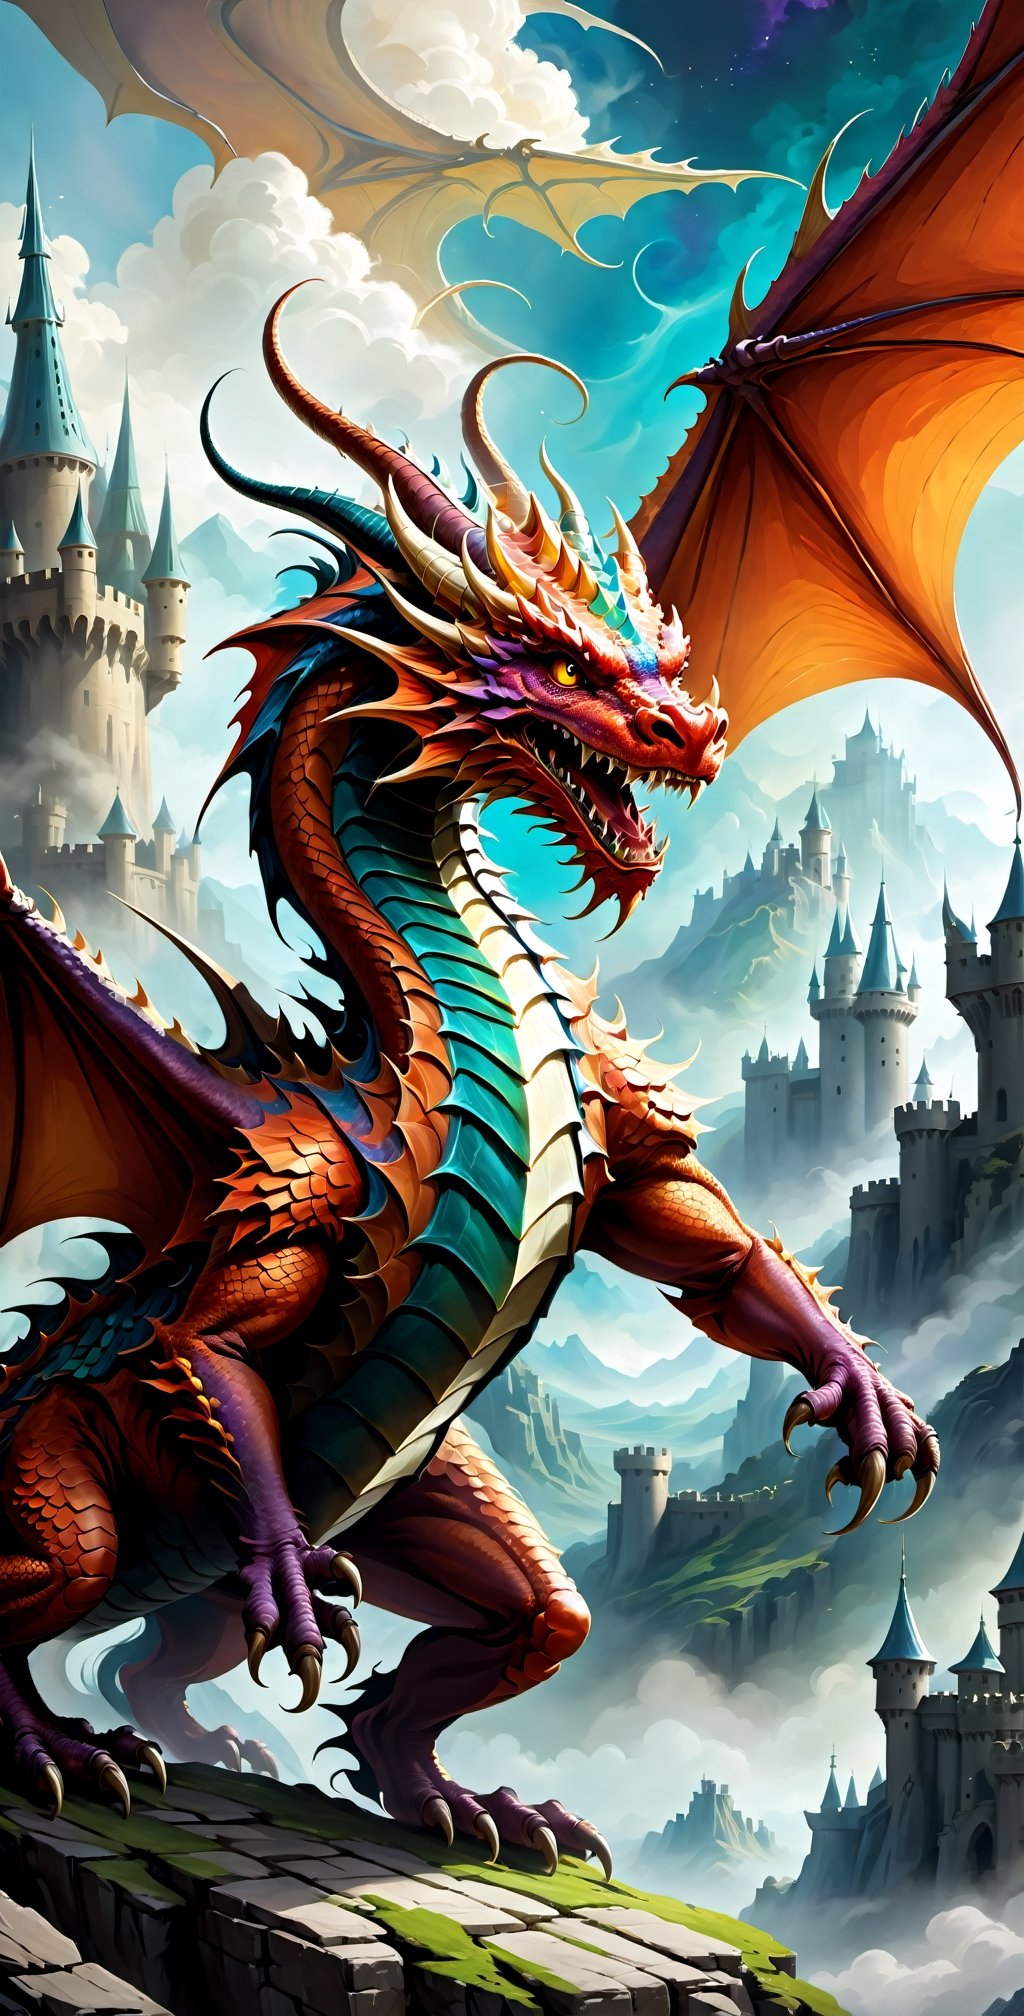 Create a digital illustration of a ((("Fantasy Dragon"))) inspired by the works of renowned fantasy artist Wayne Reynolds. The dragon should be in a dynamic mid-flight pose against a backdrop of an ancient, sprawling castle. Apply a detailed and painterly art style, using rich, vivid colors and fine textures. The camera shot should be a dynamic extreme close-up to emphasize the dragon's fierce expression.